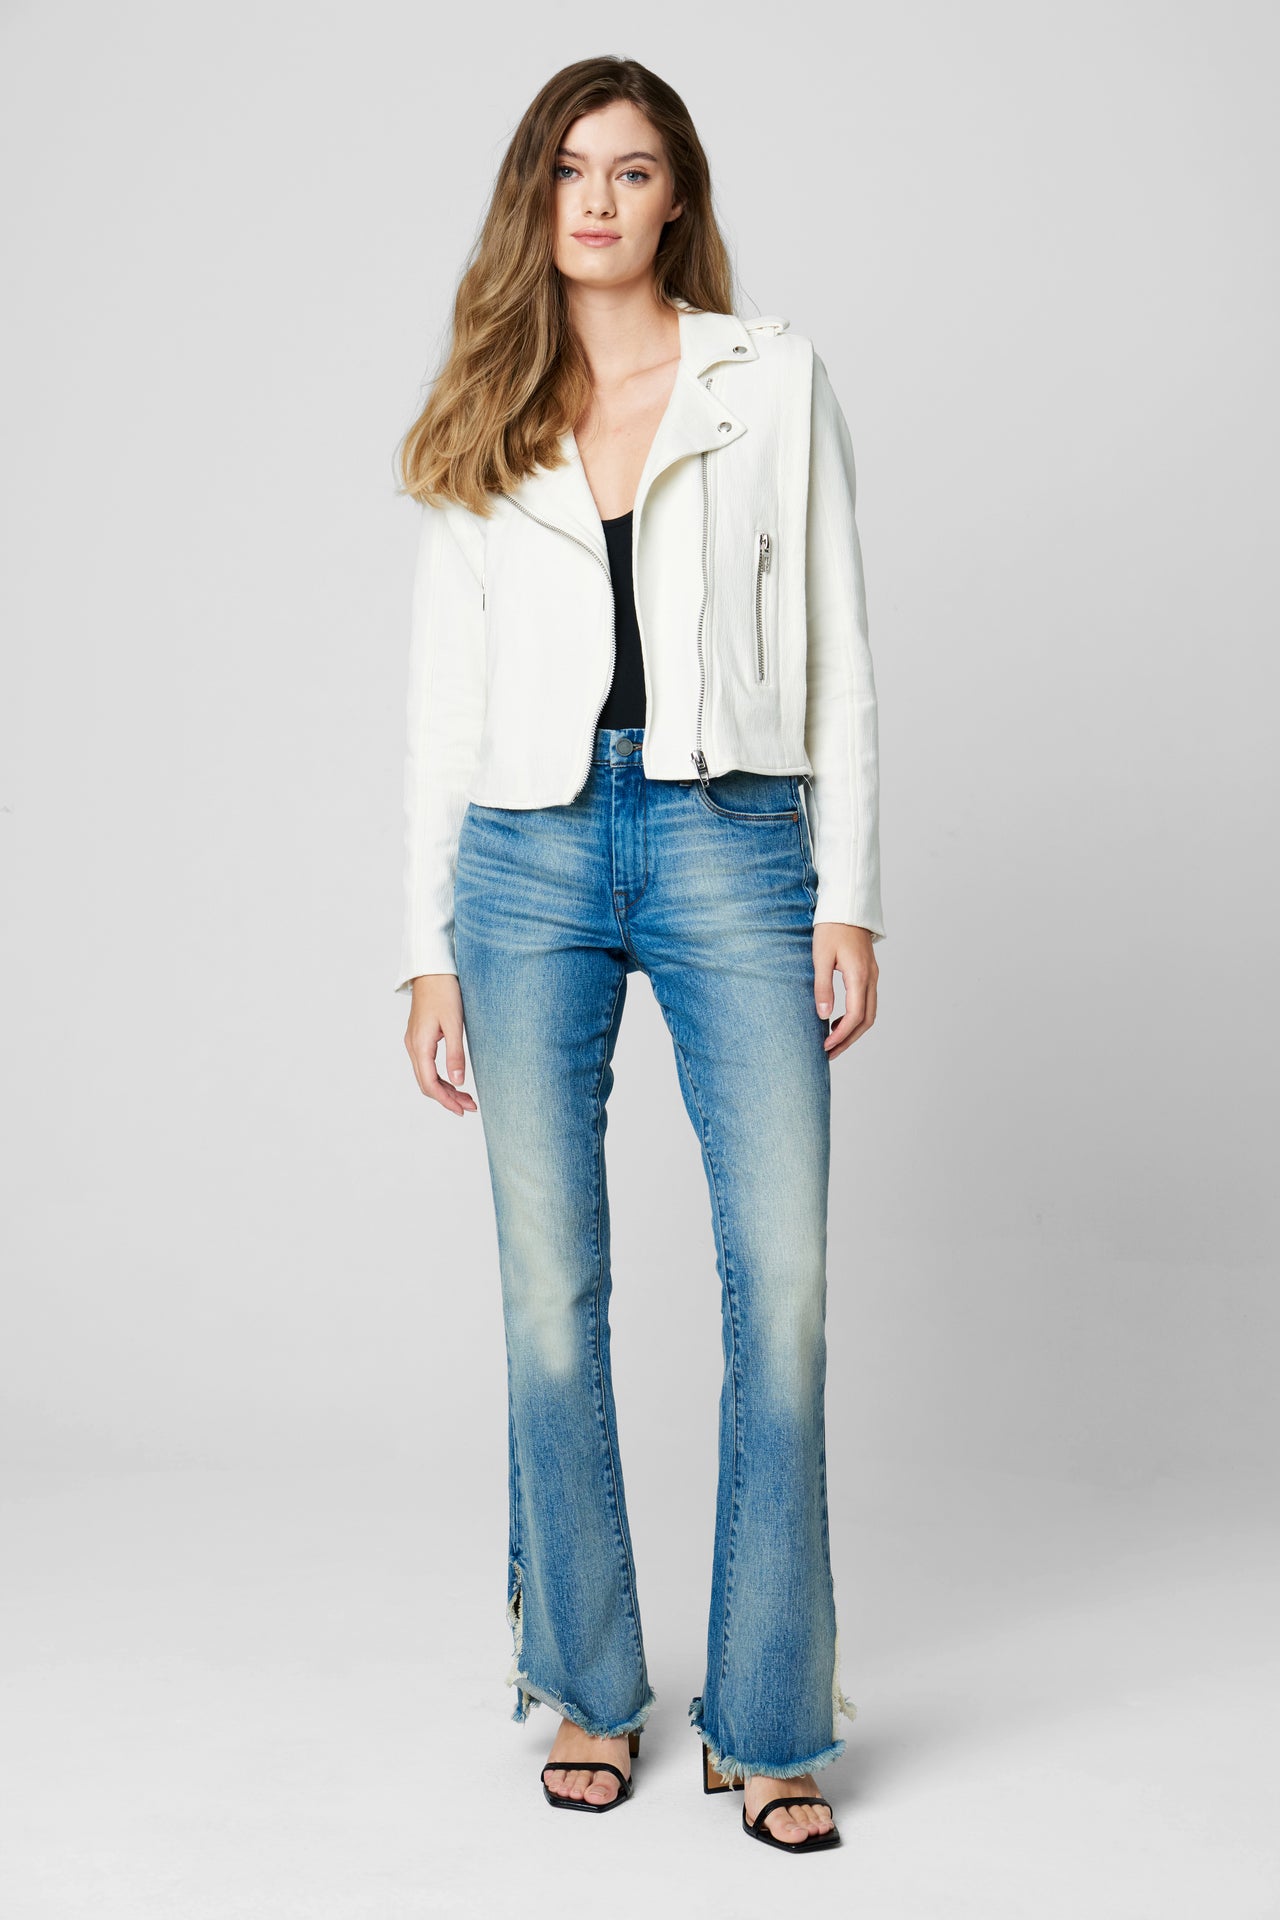 So Ice Jacket White, Jacket by Blank NYC | LIT Boutique